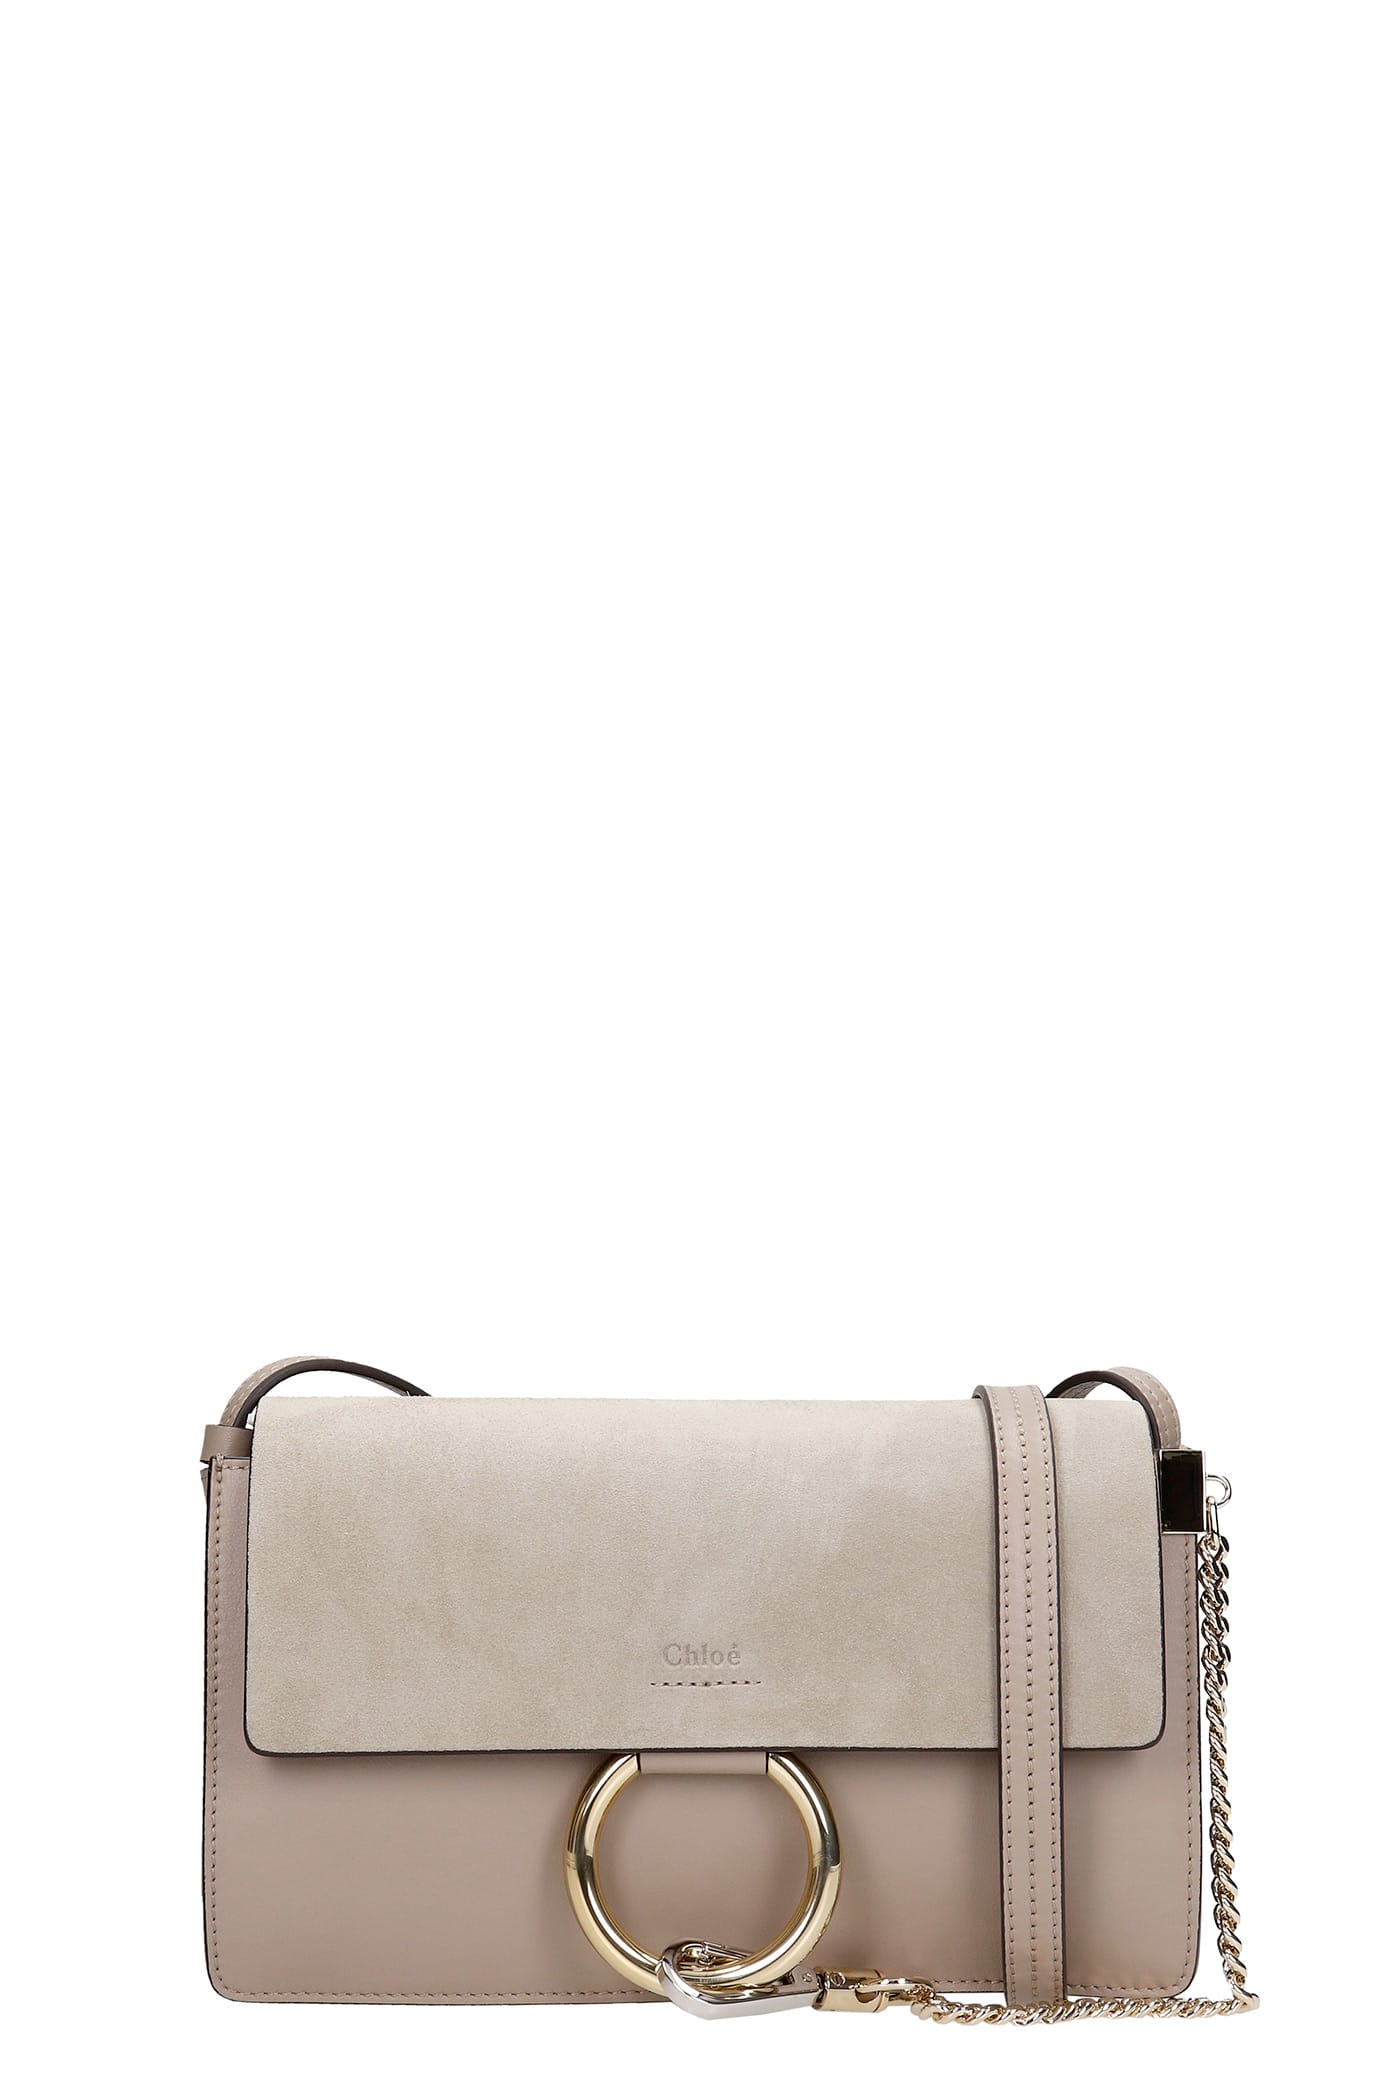 Chloé Faye Small Shoulder Bag In Grey Suede And Leather